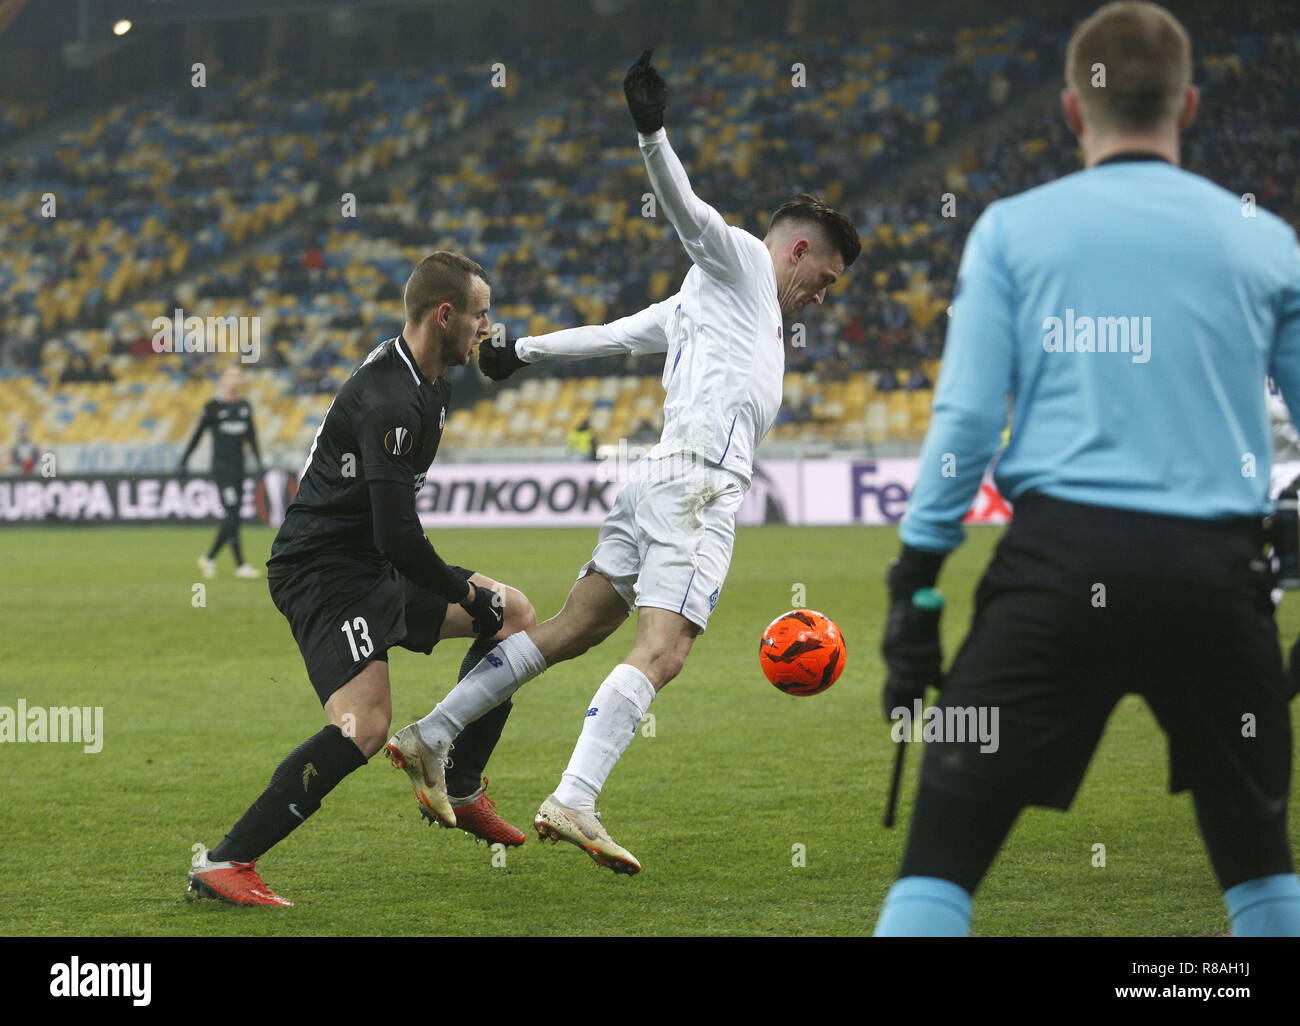 Kiev, Ukraine. 13th Dec, 2018. David Lischka (L) of Jablonec and Benjamin Verbic (R) of Dynamo are seen in action during the UEFA Europa League Group K soccer match between FC Dynamo Kiev and FK Jablonec at the NSK Olimpiyskiy in Kiev. Credit: Vadim Kot/SOPA Images/ZUMA Wire/Alamy Live News Stock Photo